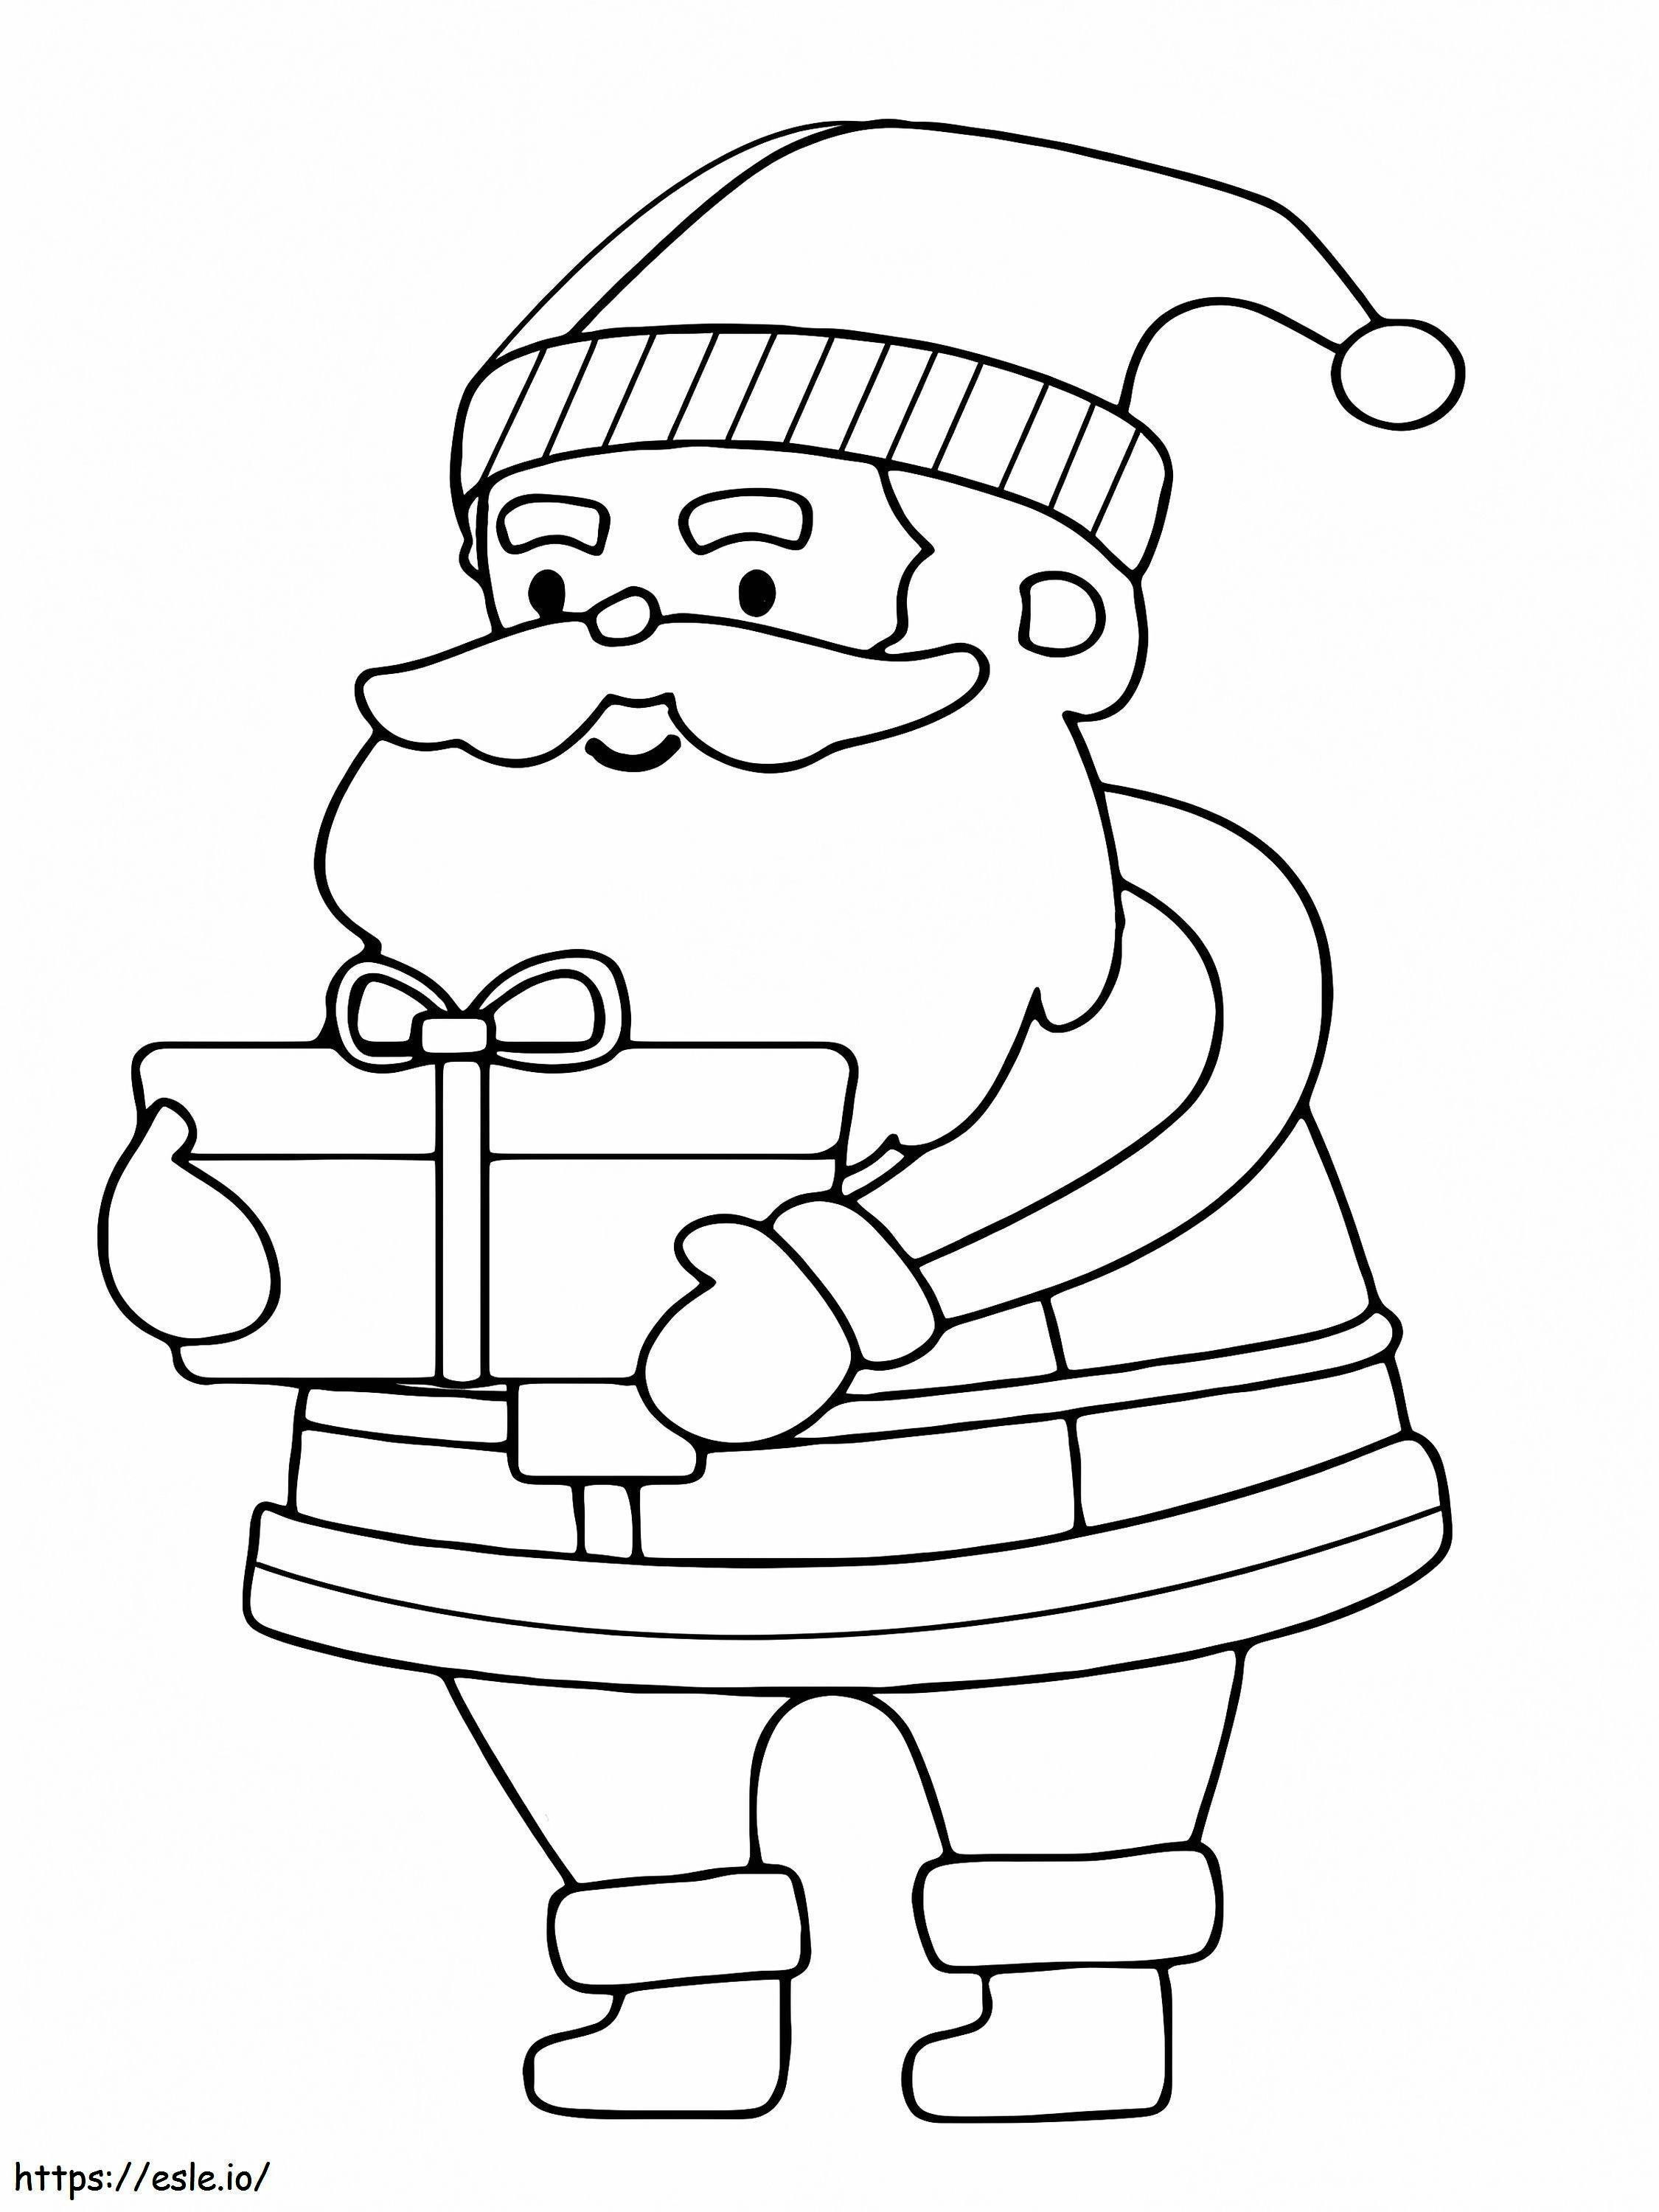 Santa Claus Carrying A Gift coloring page